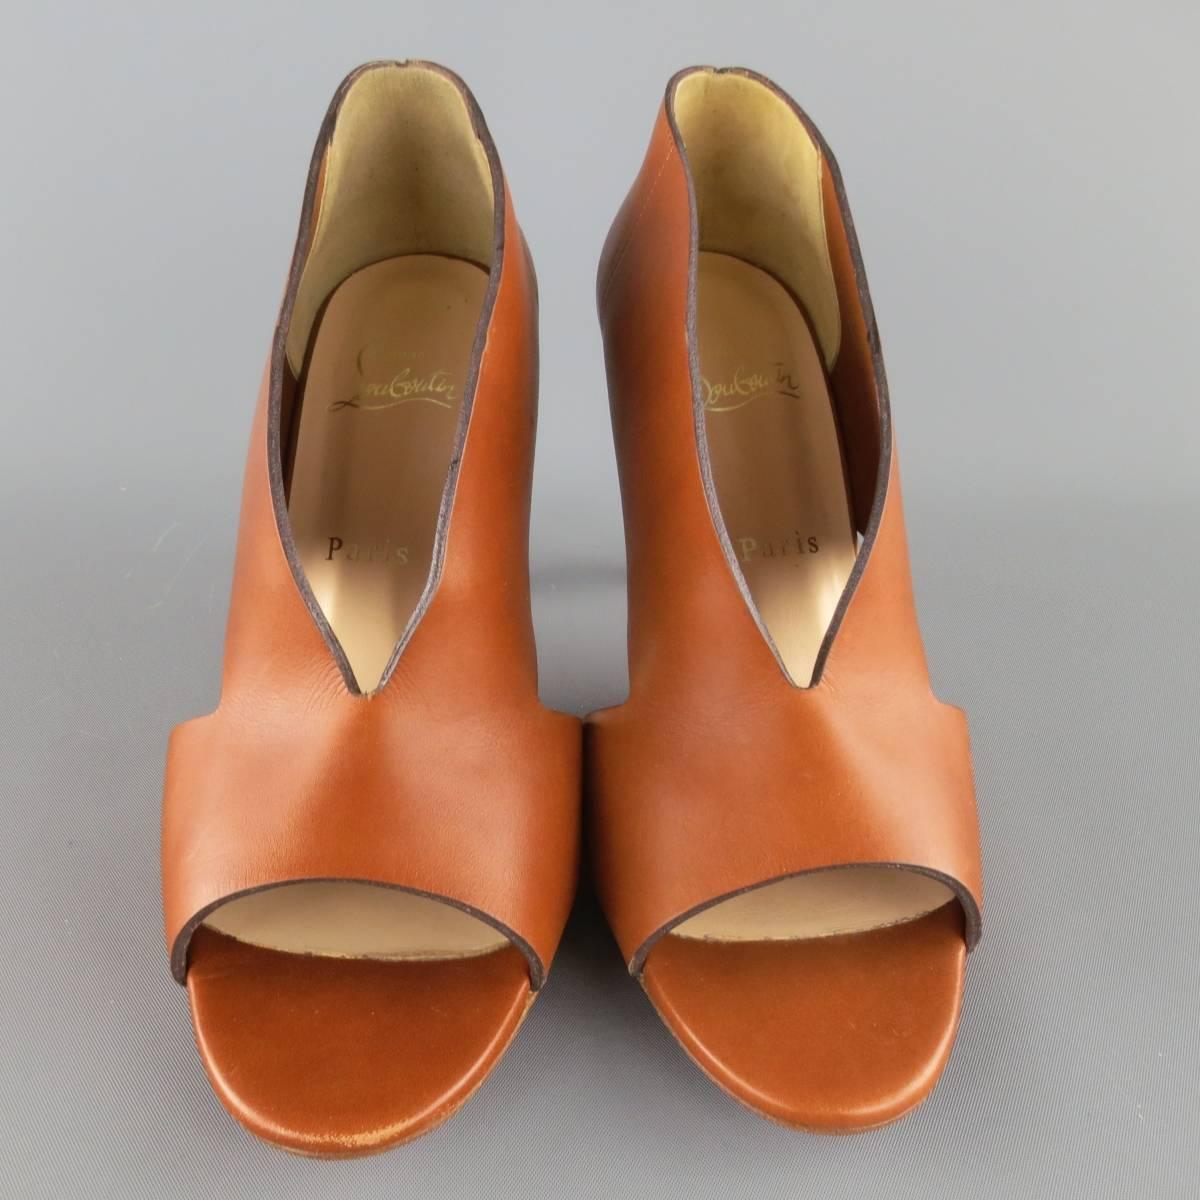 CHRISTIAN LOUBOUTIN booties come in tan brown leather and feature a peep toe, side cutouts, and stacked stiletto heel. Never Worn. Made in Italy.
 
Excellent Pre-Owned Condition.
Marked: IT 39
 
Heel: 3.5 in.


Web ID: 83513 